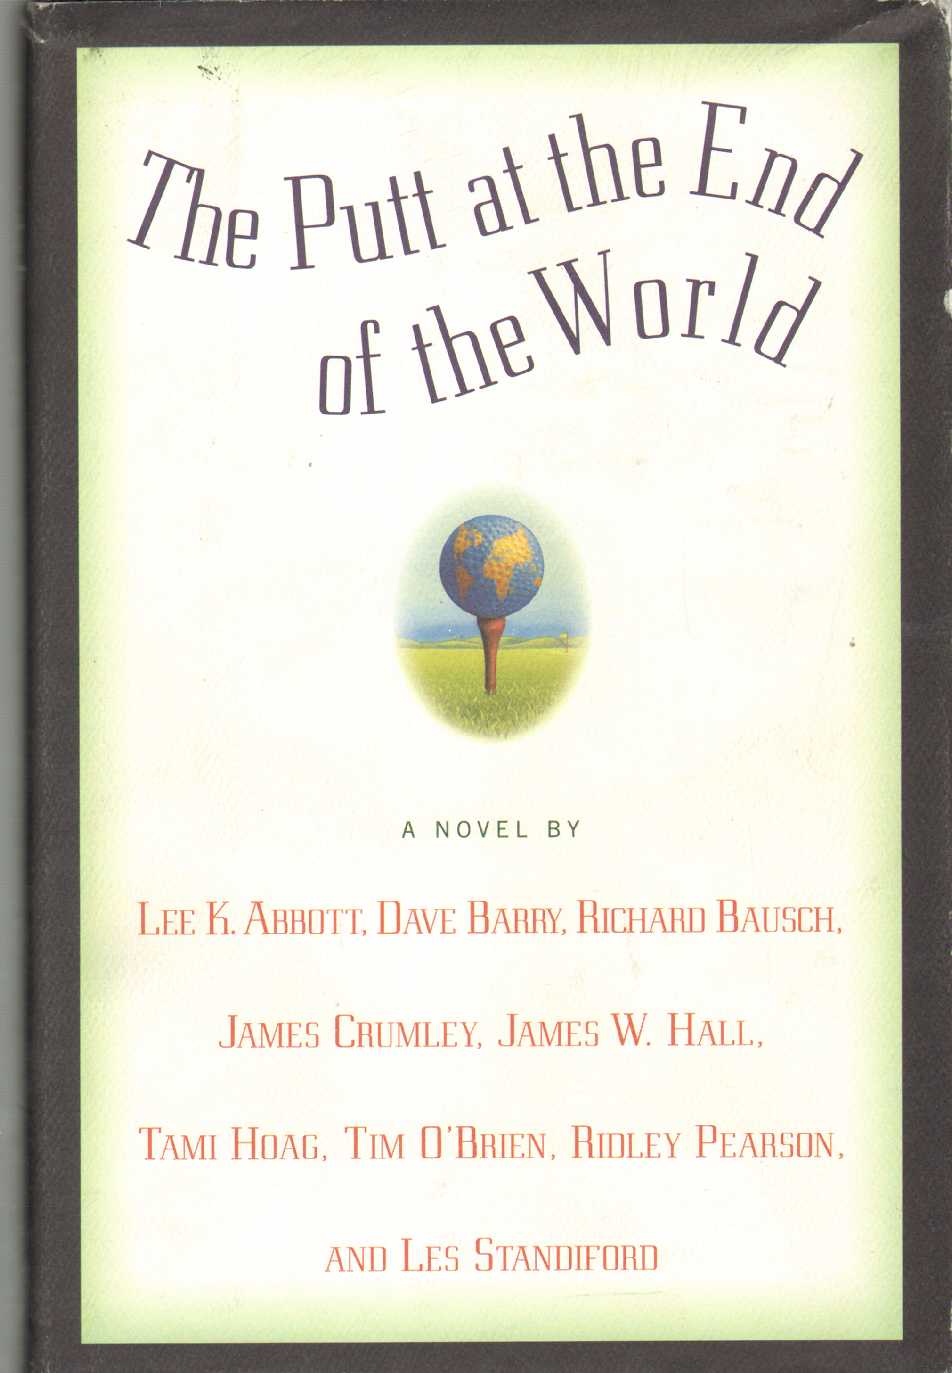 Image for THE PUTT AT THE END OF THE WORLD